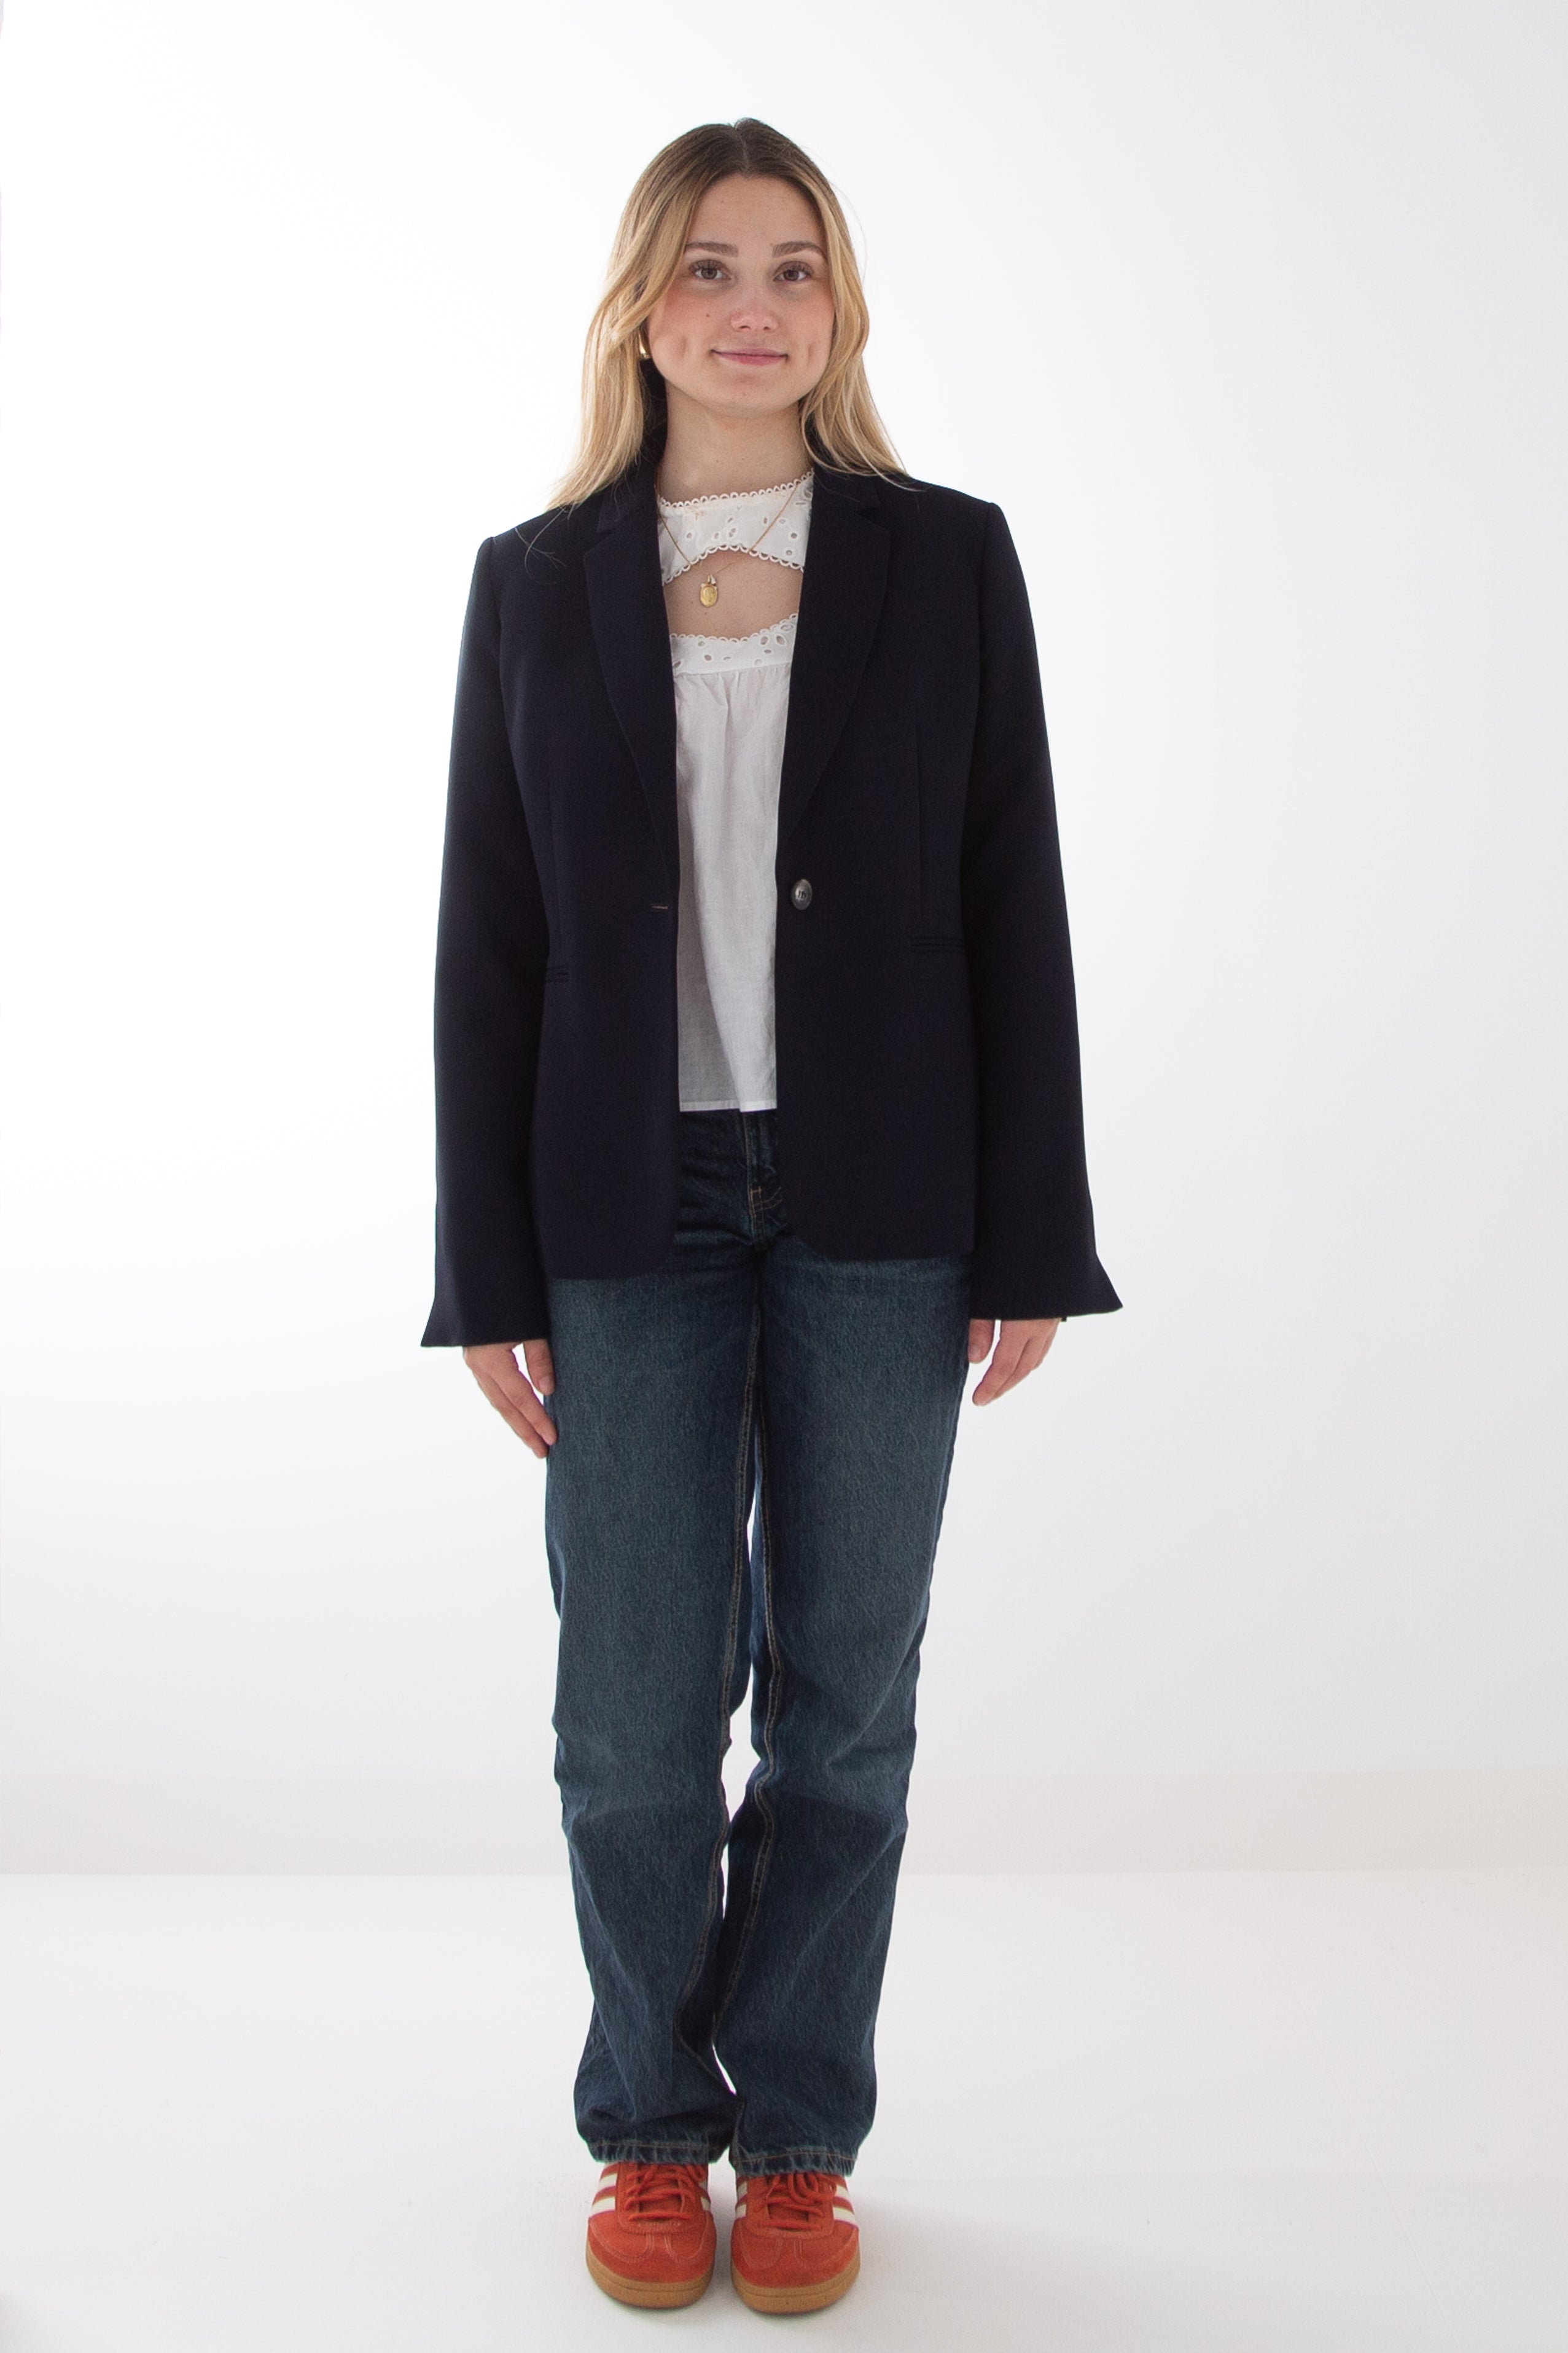 BAOLA navy blue fitted jacket-Navy blue fitted jacket in fluid fabric